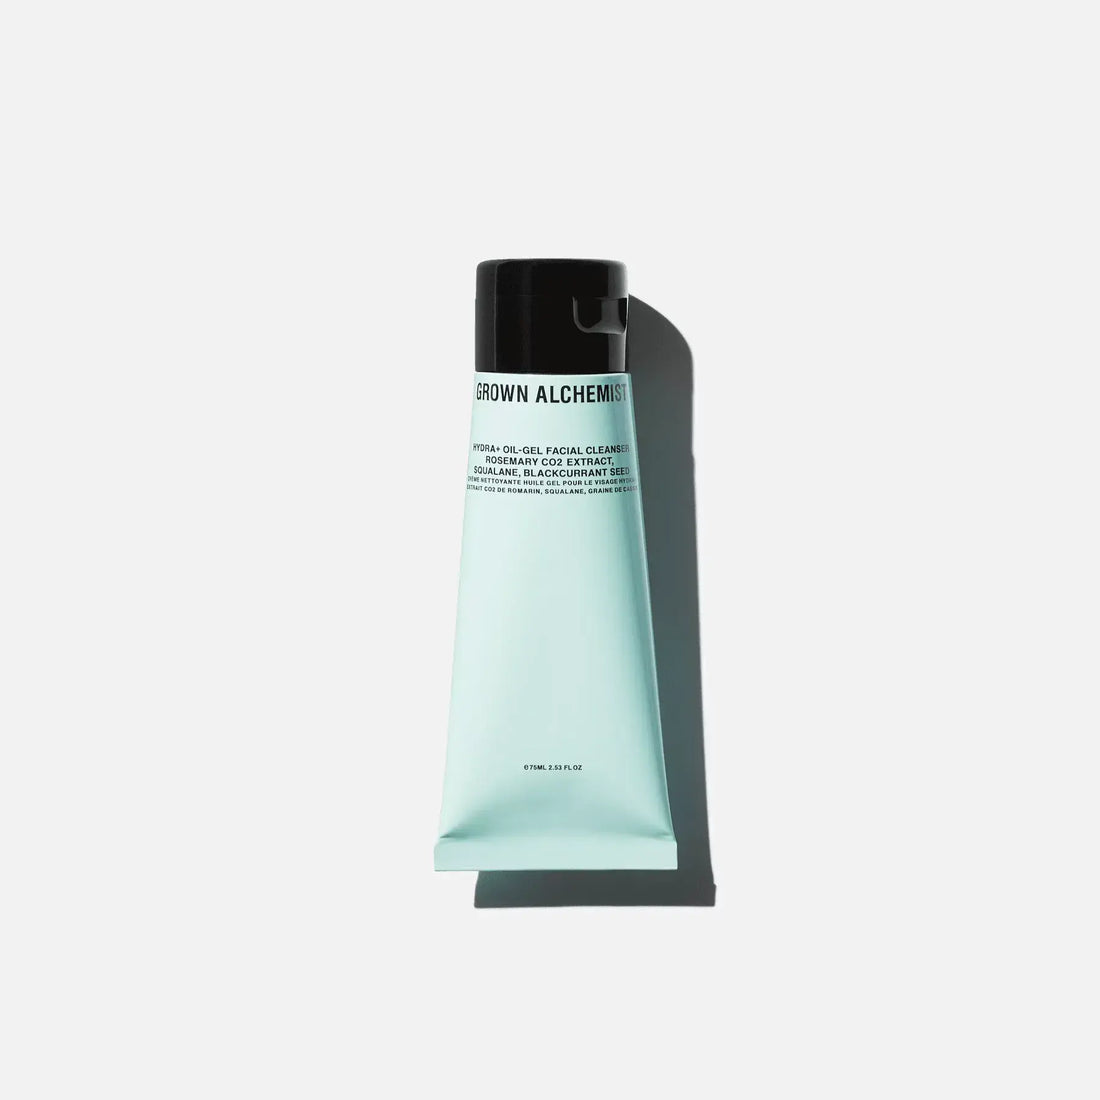 Grown Alchemist Hydra+ Oil-Gel Facial Cleanser: Rosemary CO2 Extract, Squalane, Blackcurrant Seed 75mL